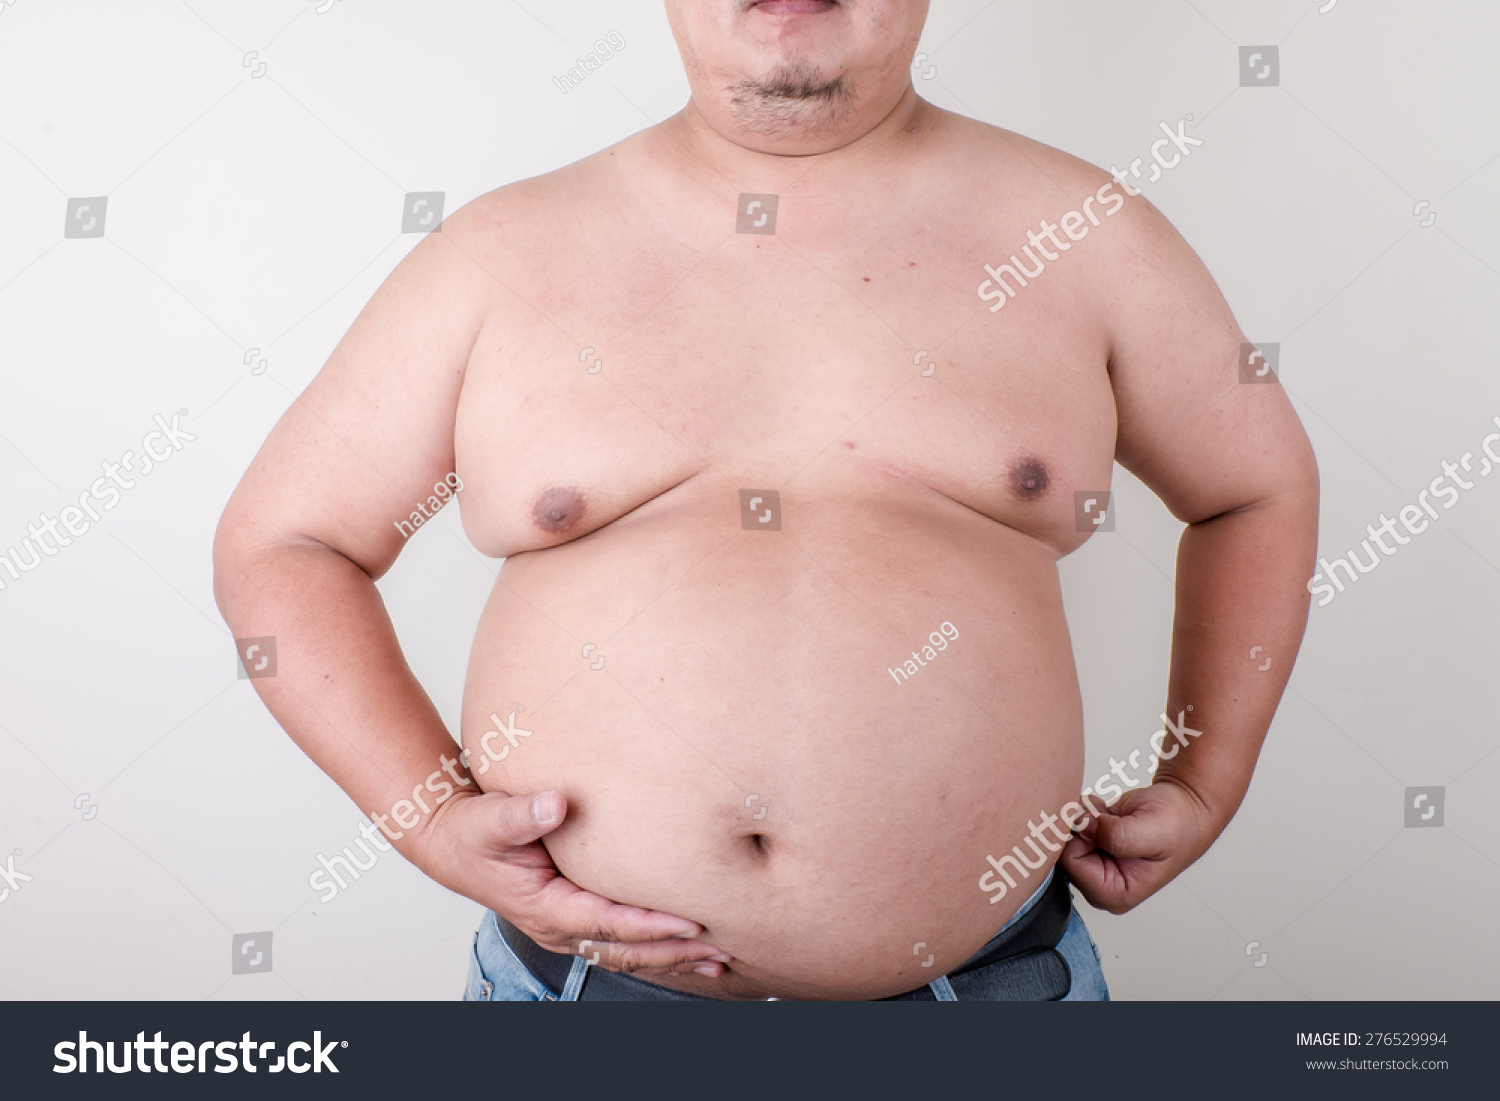 Fat Man With A Big Belly. Diet. Stock Photo 125676164 